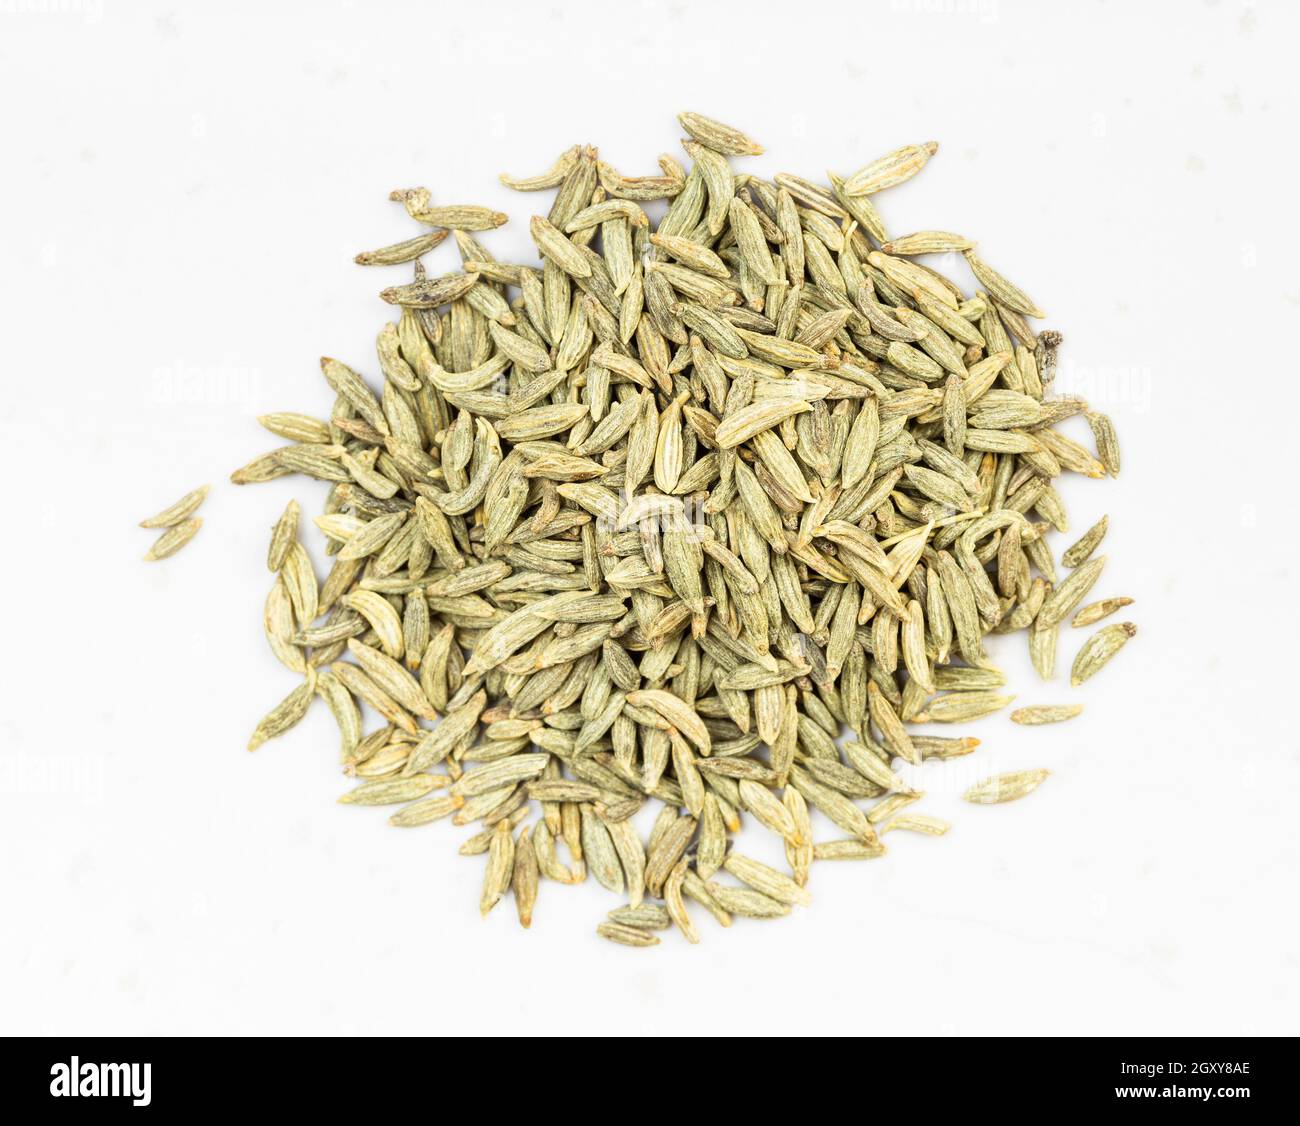 top view of pile of anise seeds close up on gray ceramic plate Stock Photo